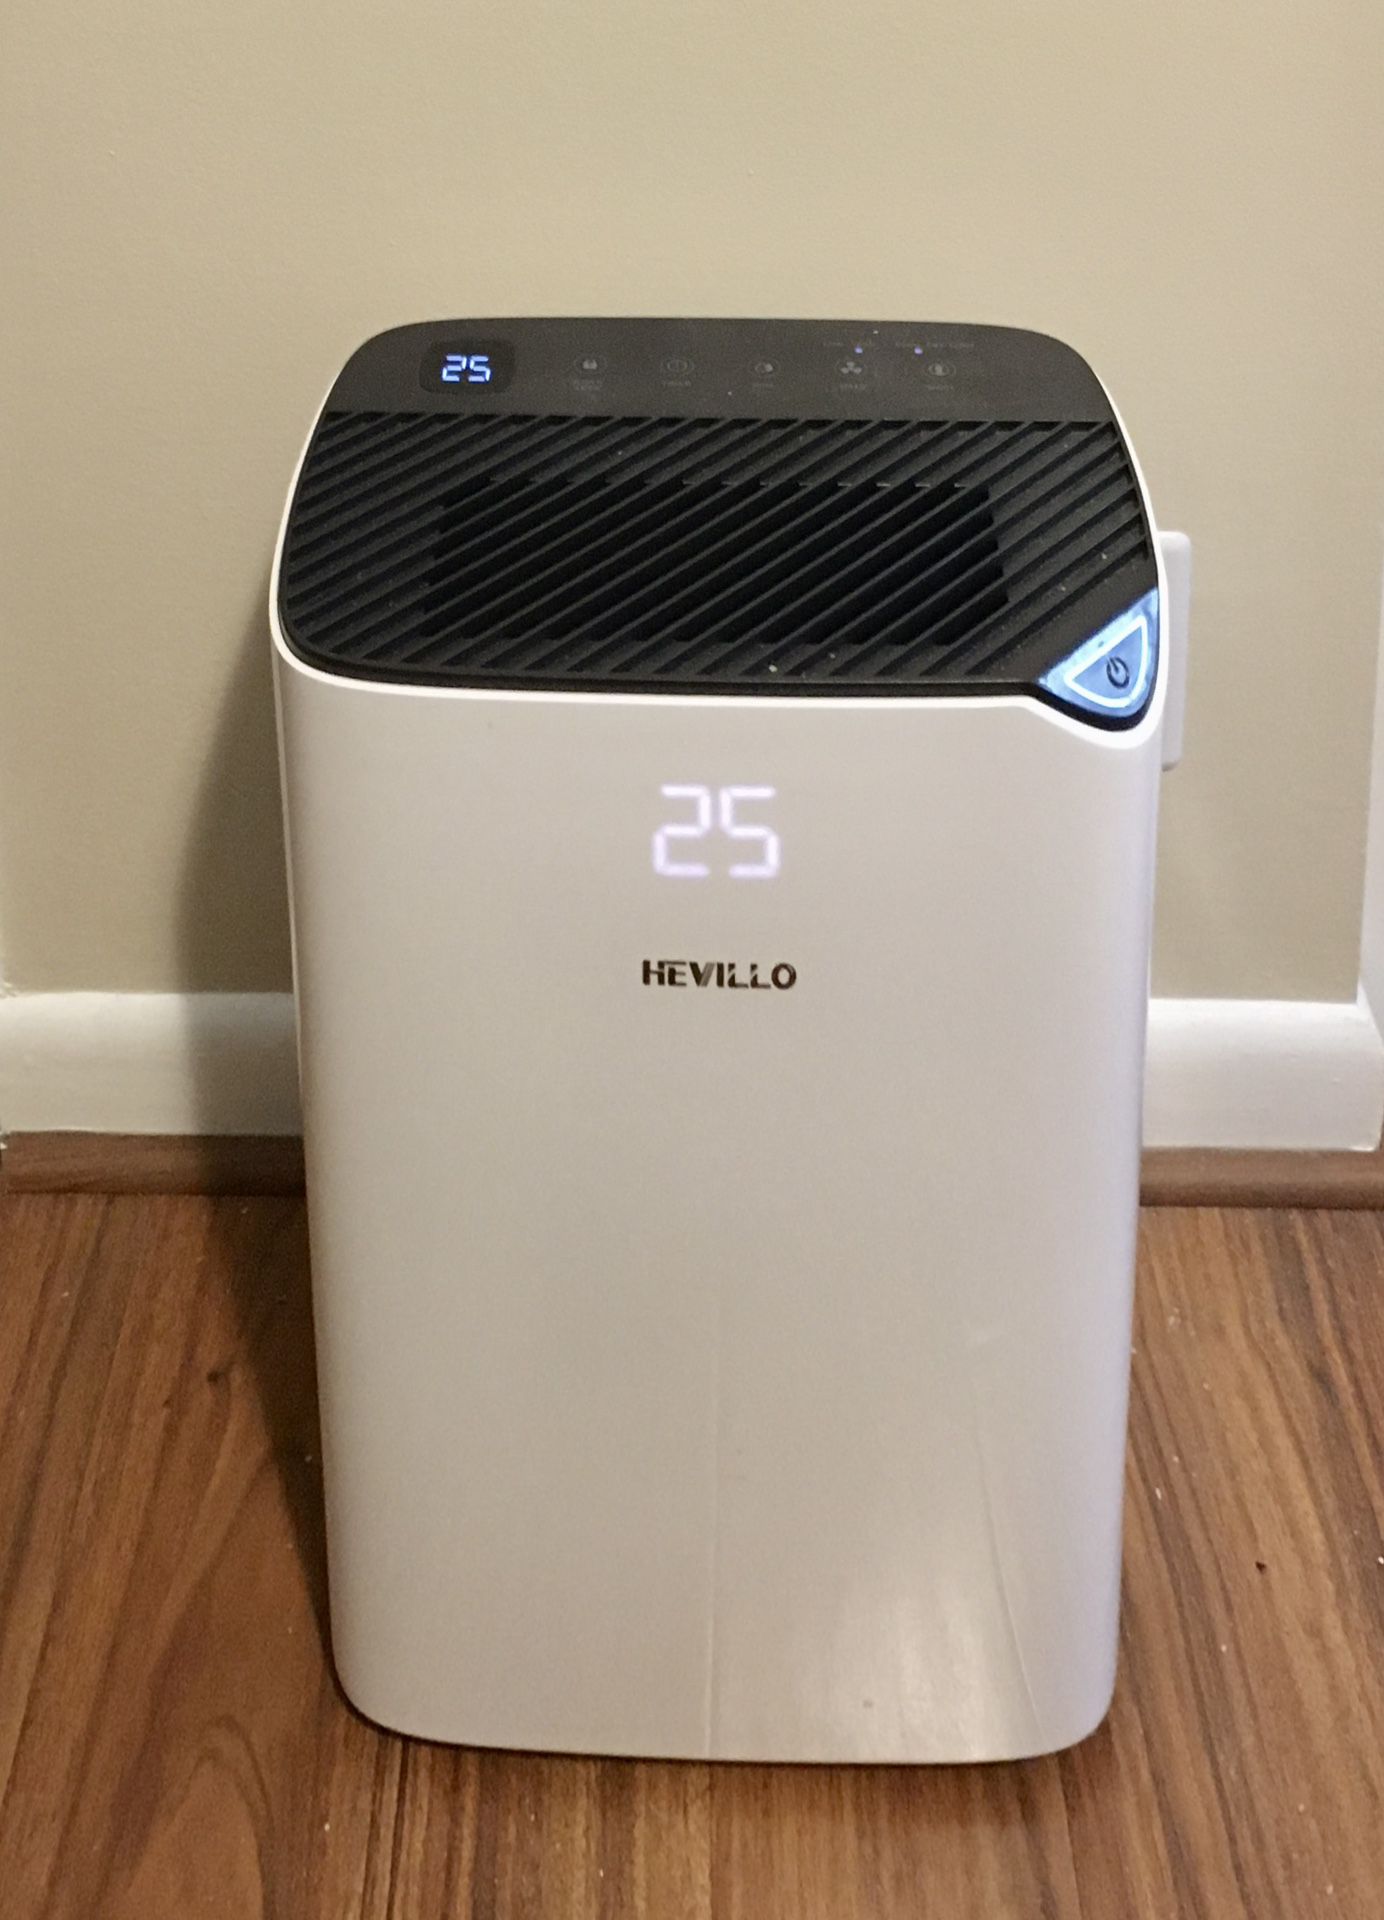 Two Hevillo dehumidifier for spaces up to 2000o sq ft